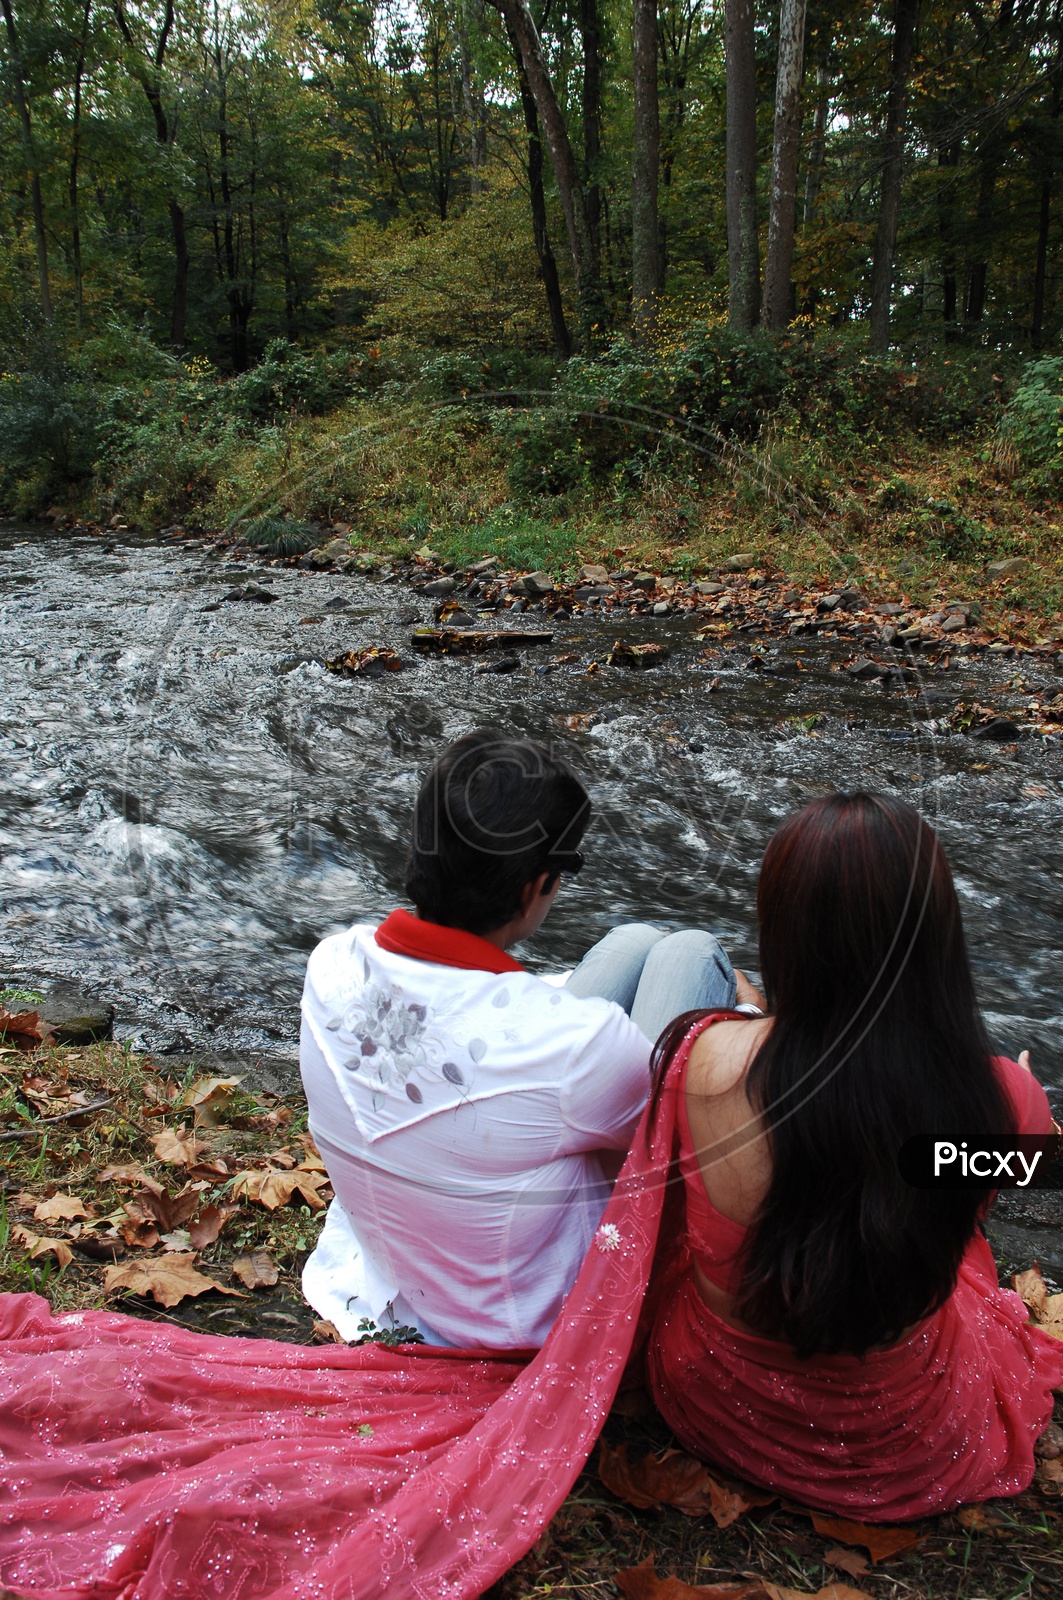 Indian couple along the water stream